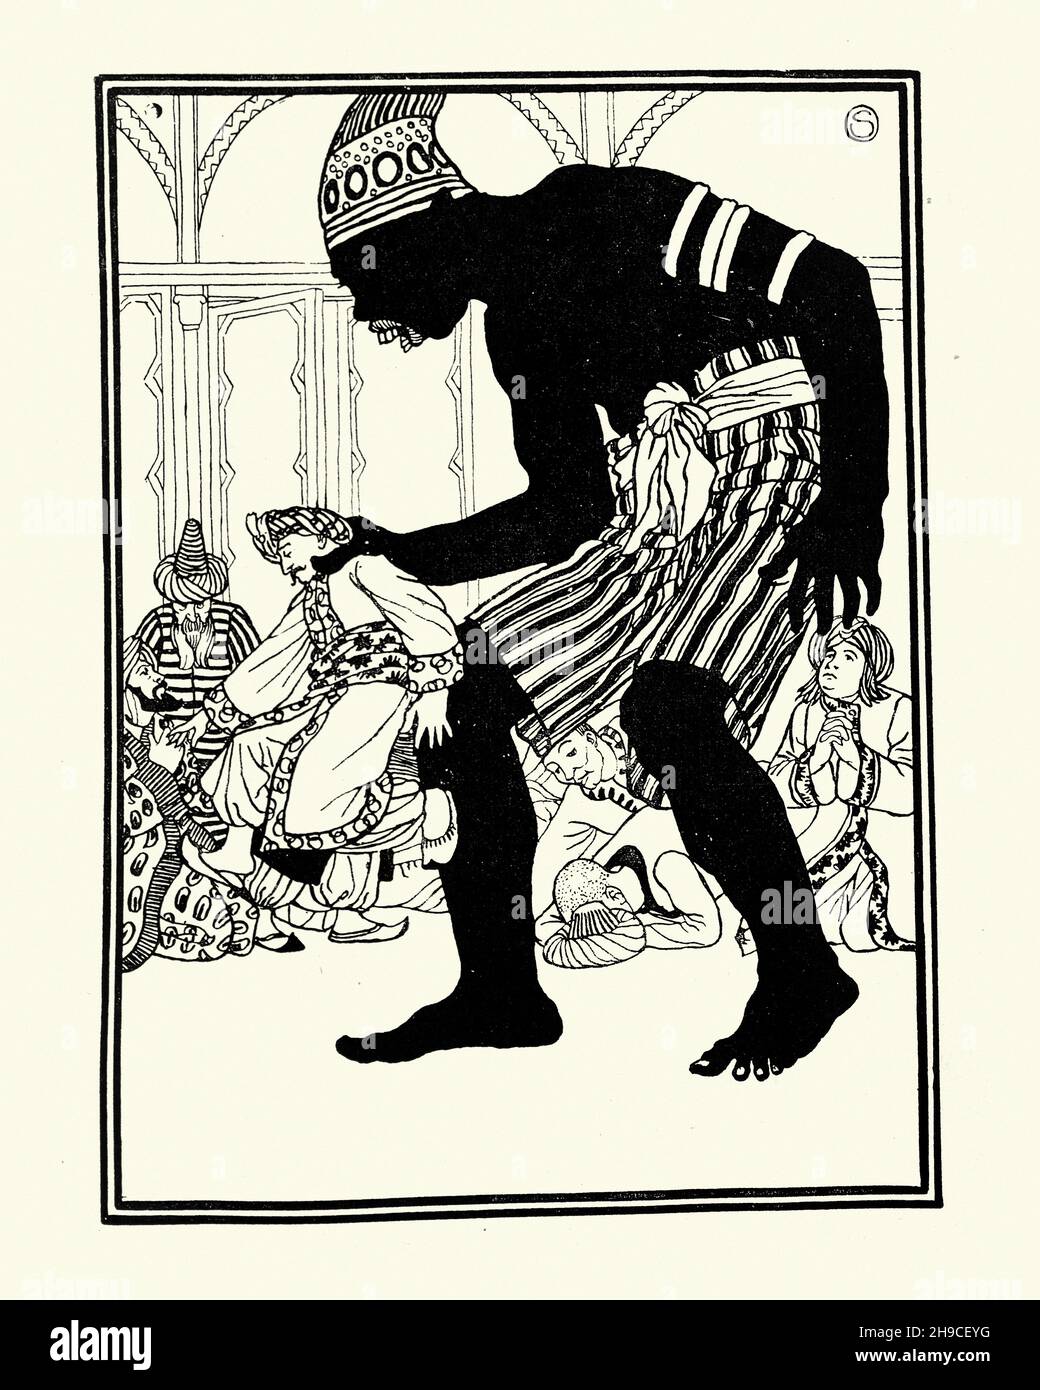 Vintage illustration from Third voyage of Sinbad the Sailor, Giant attacking a sailor. William Strang Stock Photo